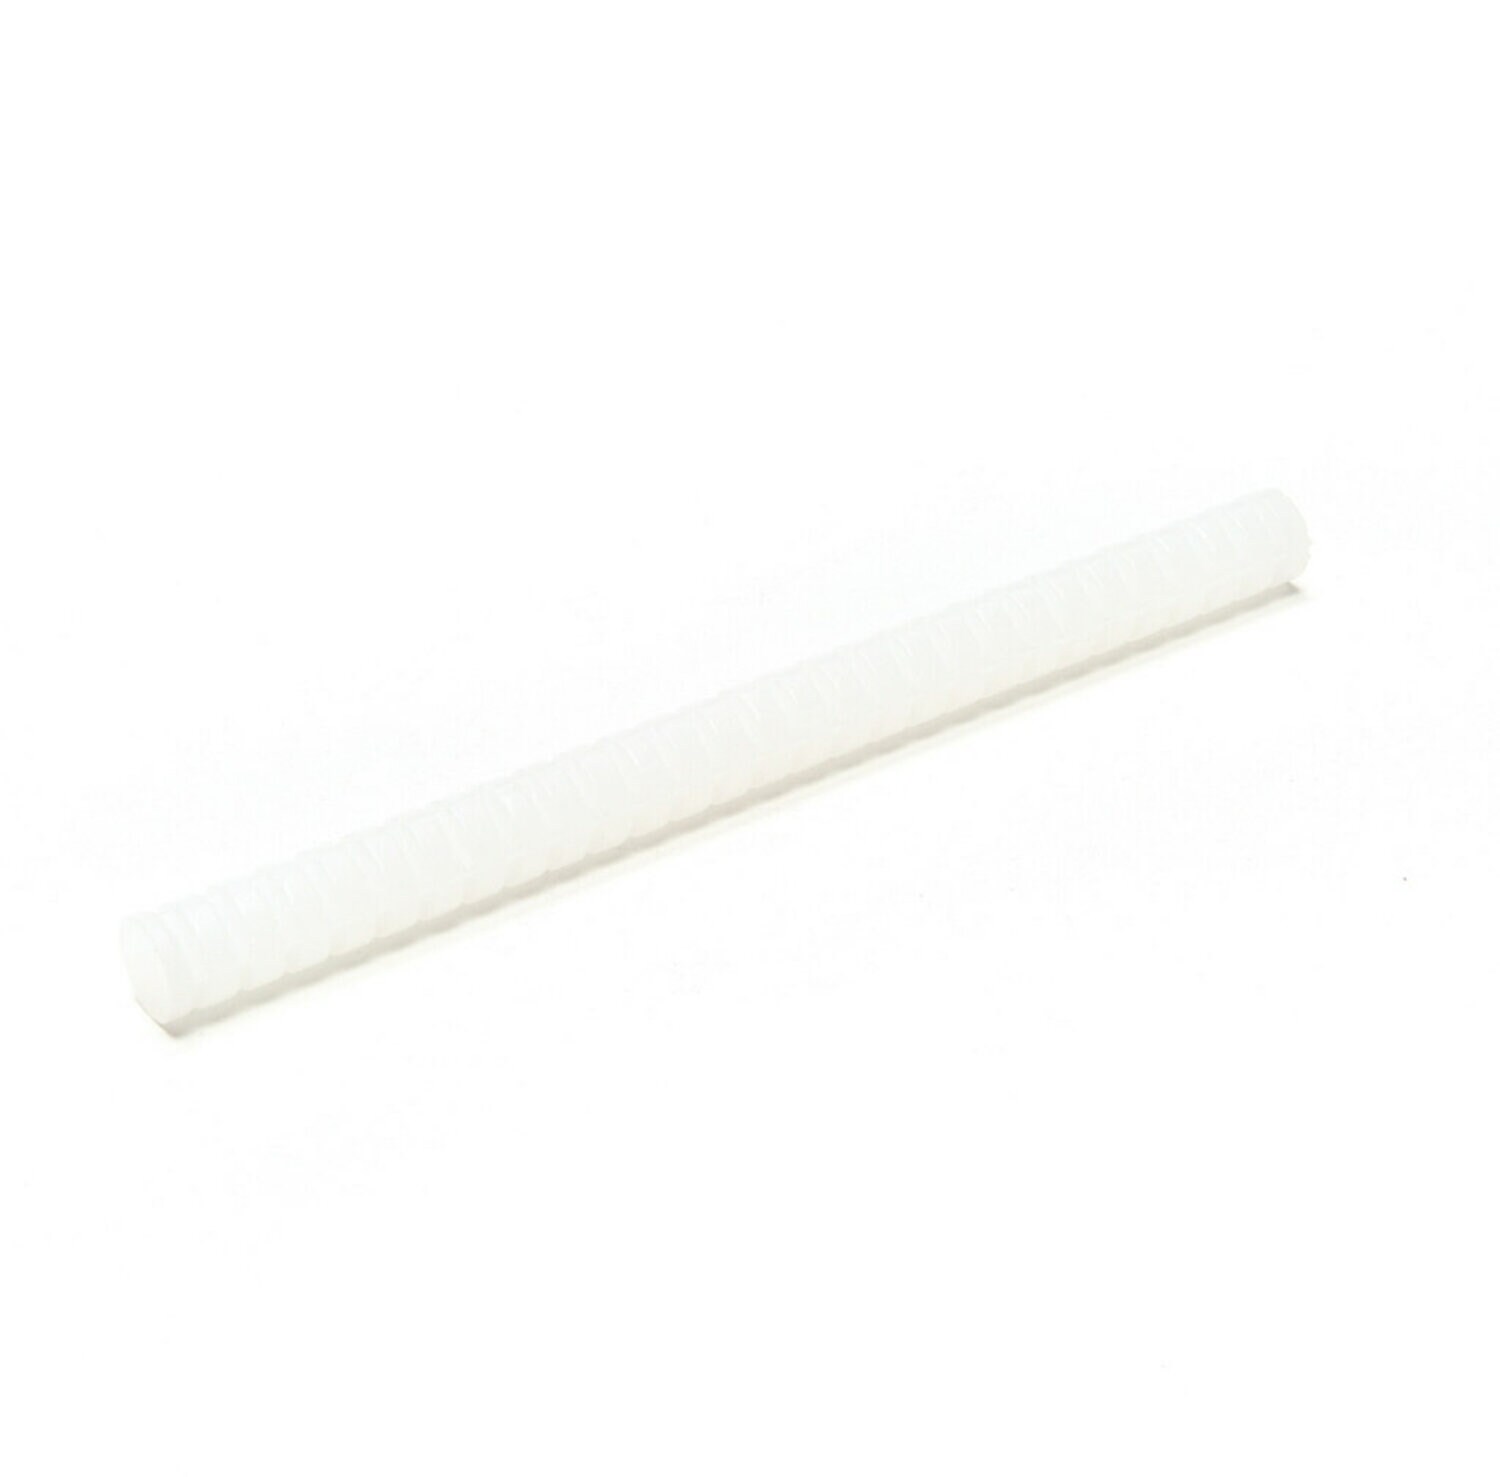 7100008178 - 3M Hot Melt Adhesive 3764Q, Clear, 5/8 in x 8 Inch, 11 lb, Case